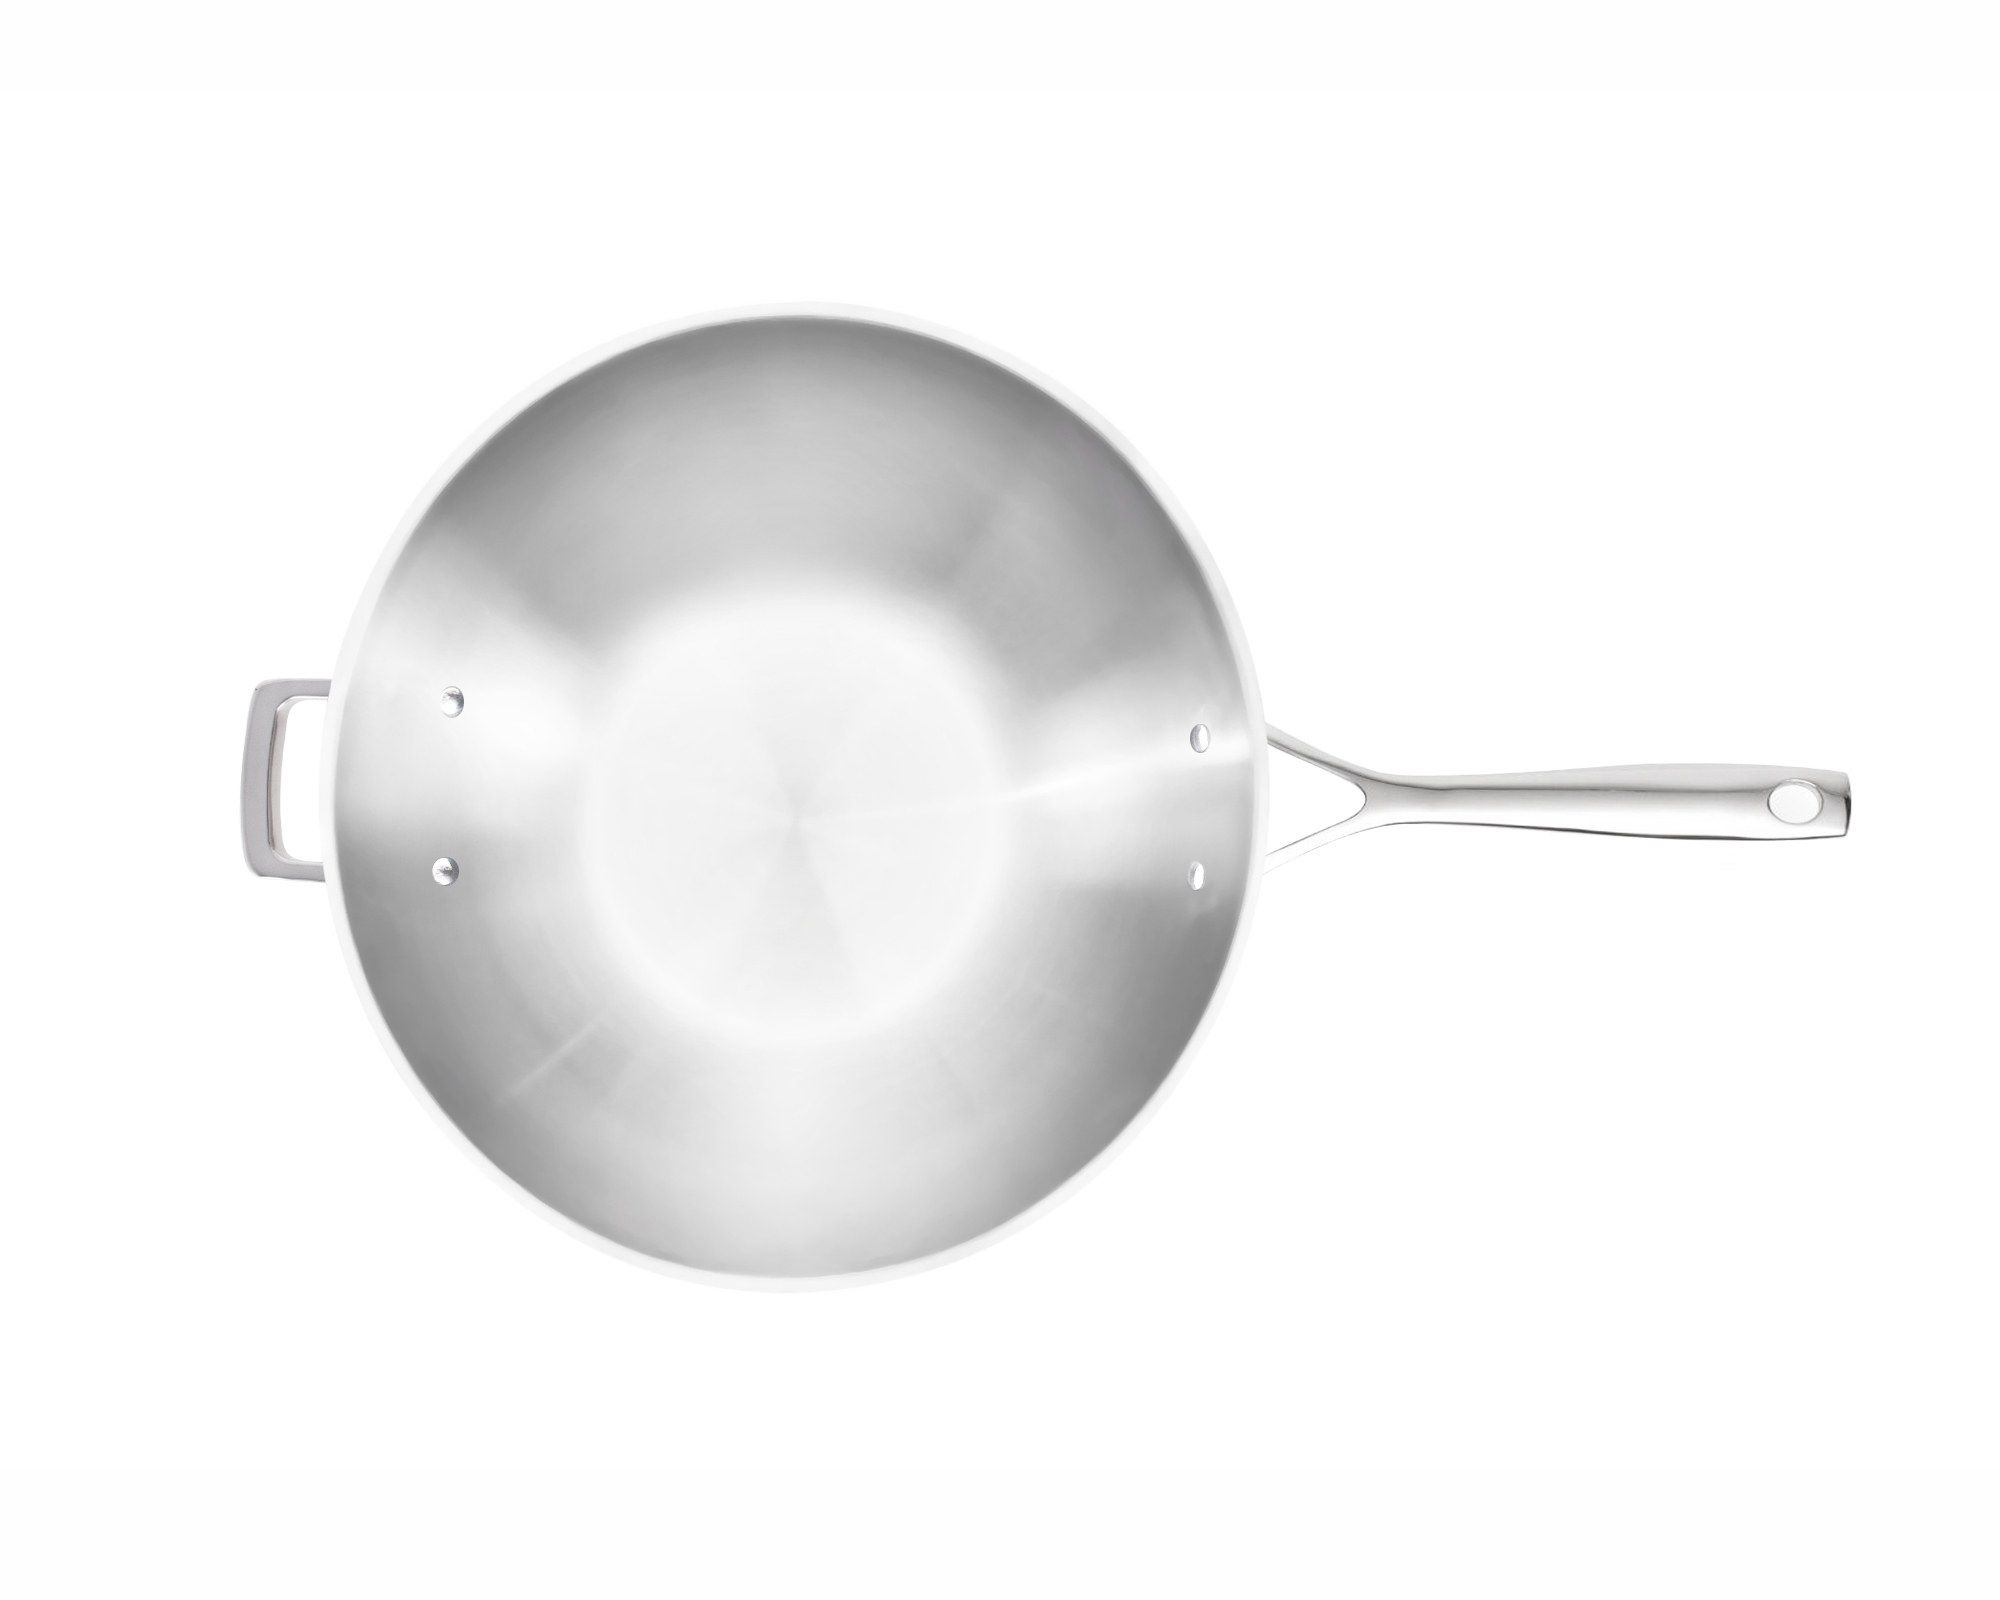 Olavson Wok Long Handle Uncoated from above